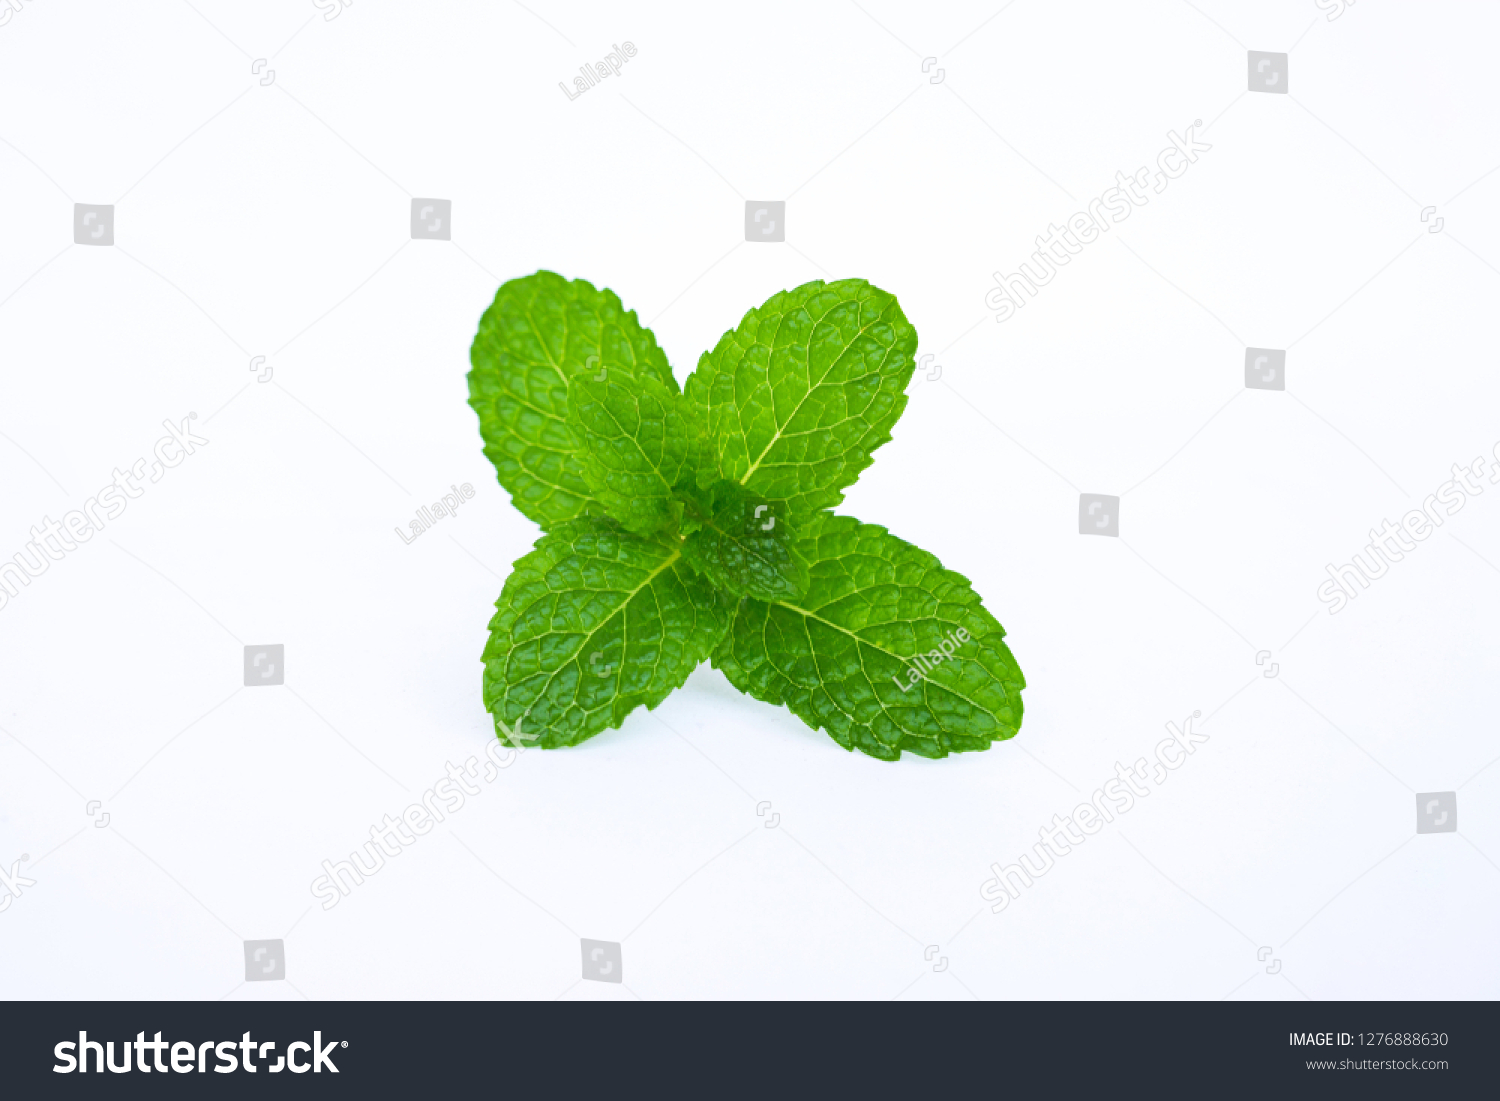 Close up green mint leaf on white background. #1276888630